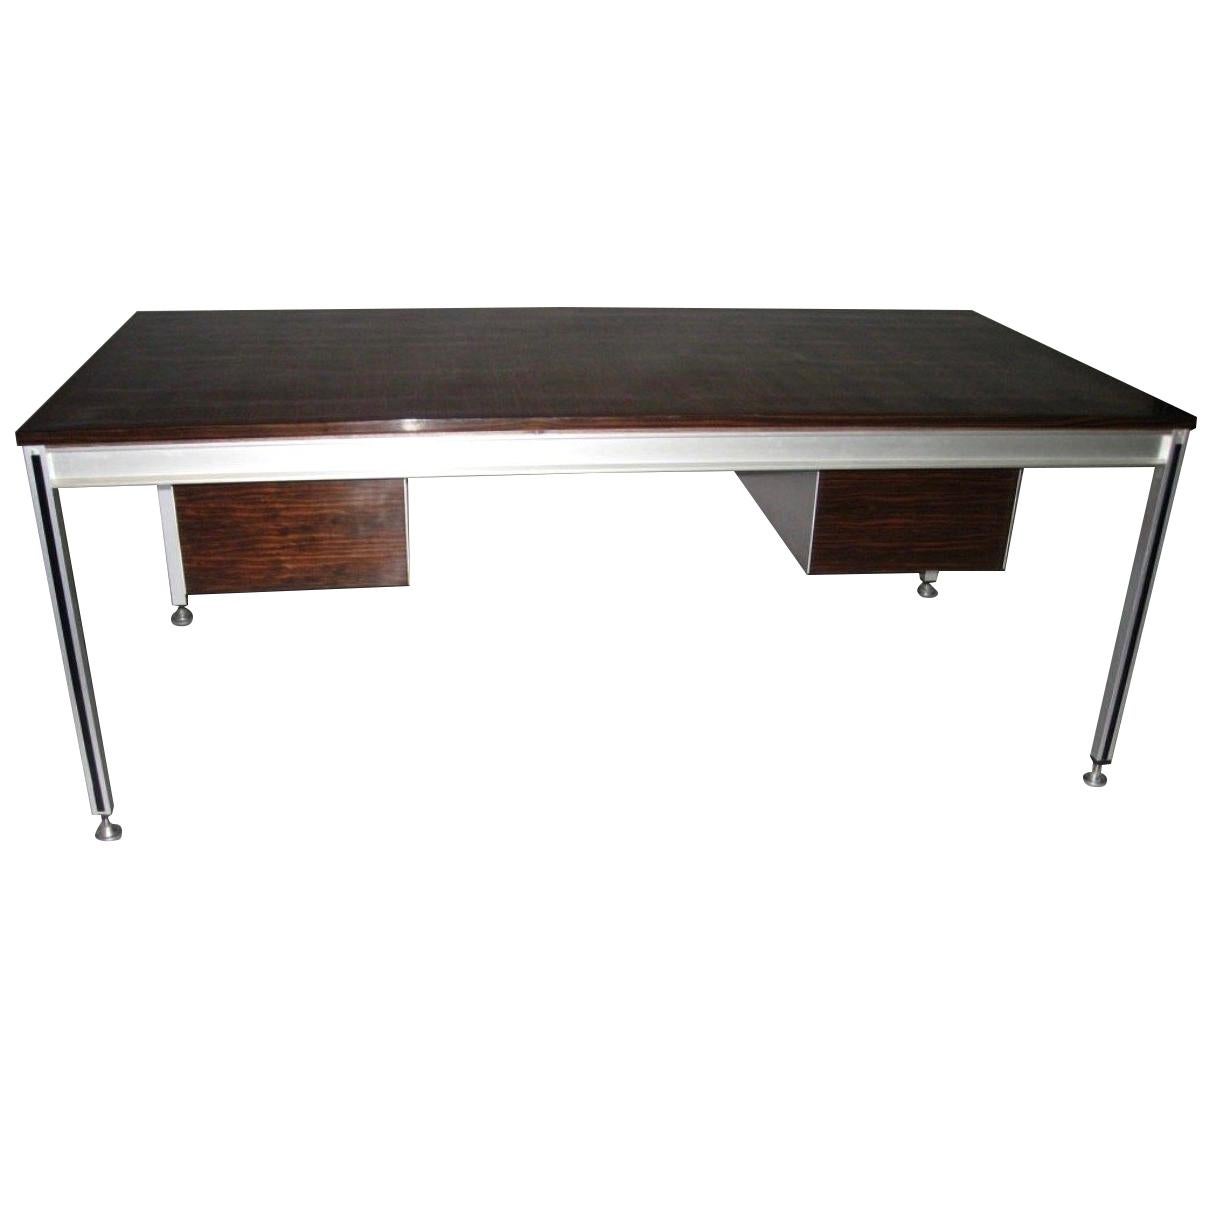 Executive Desk by C. Gaillard & H. Lesetre for TFM, France, circa 1965 For Sale